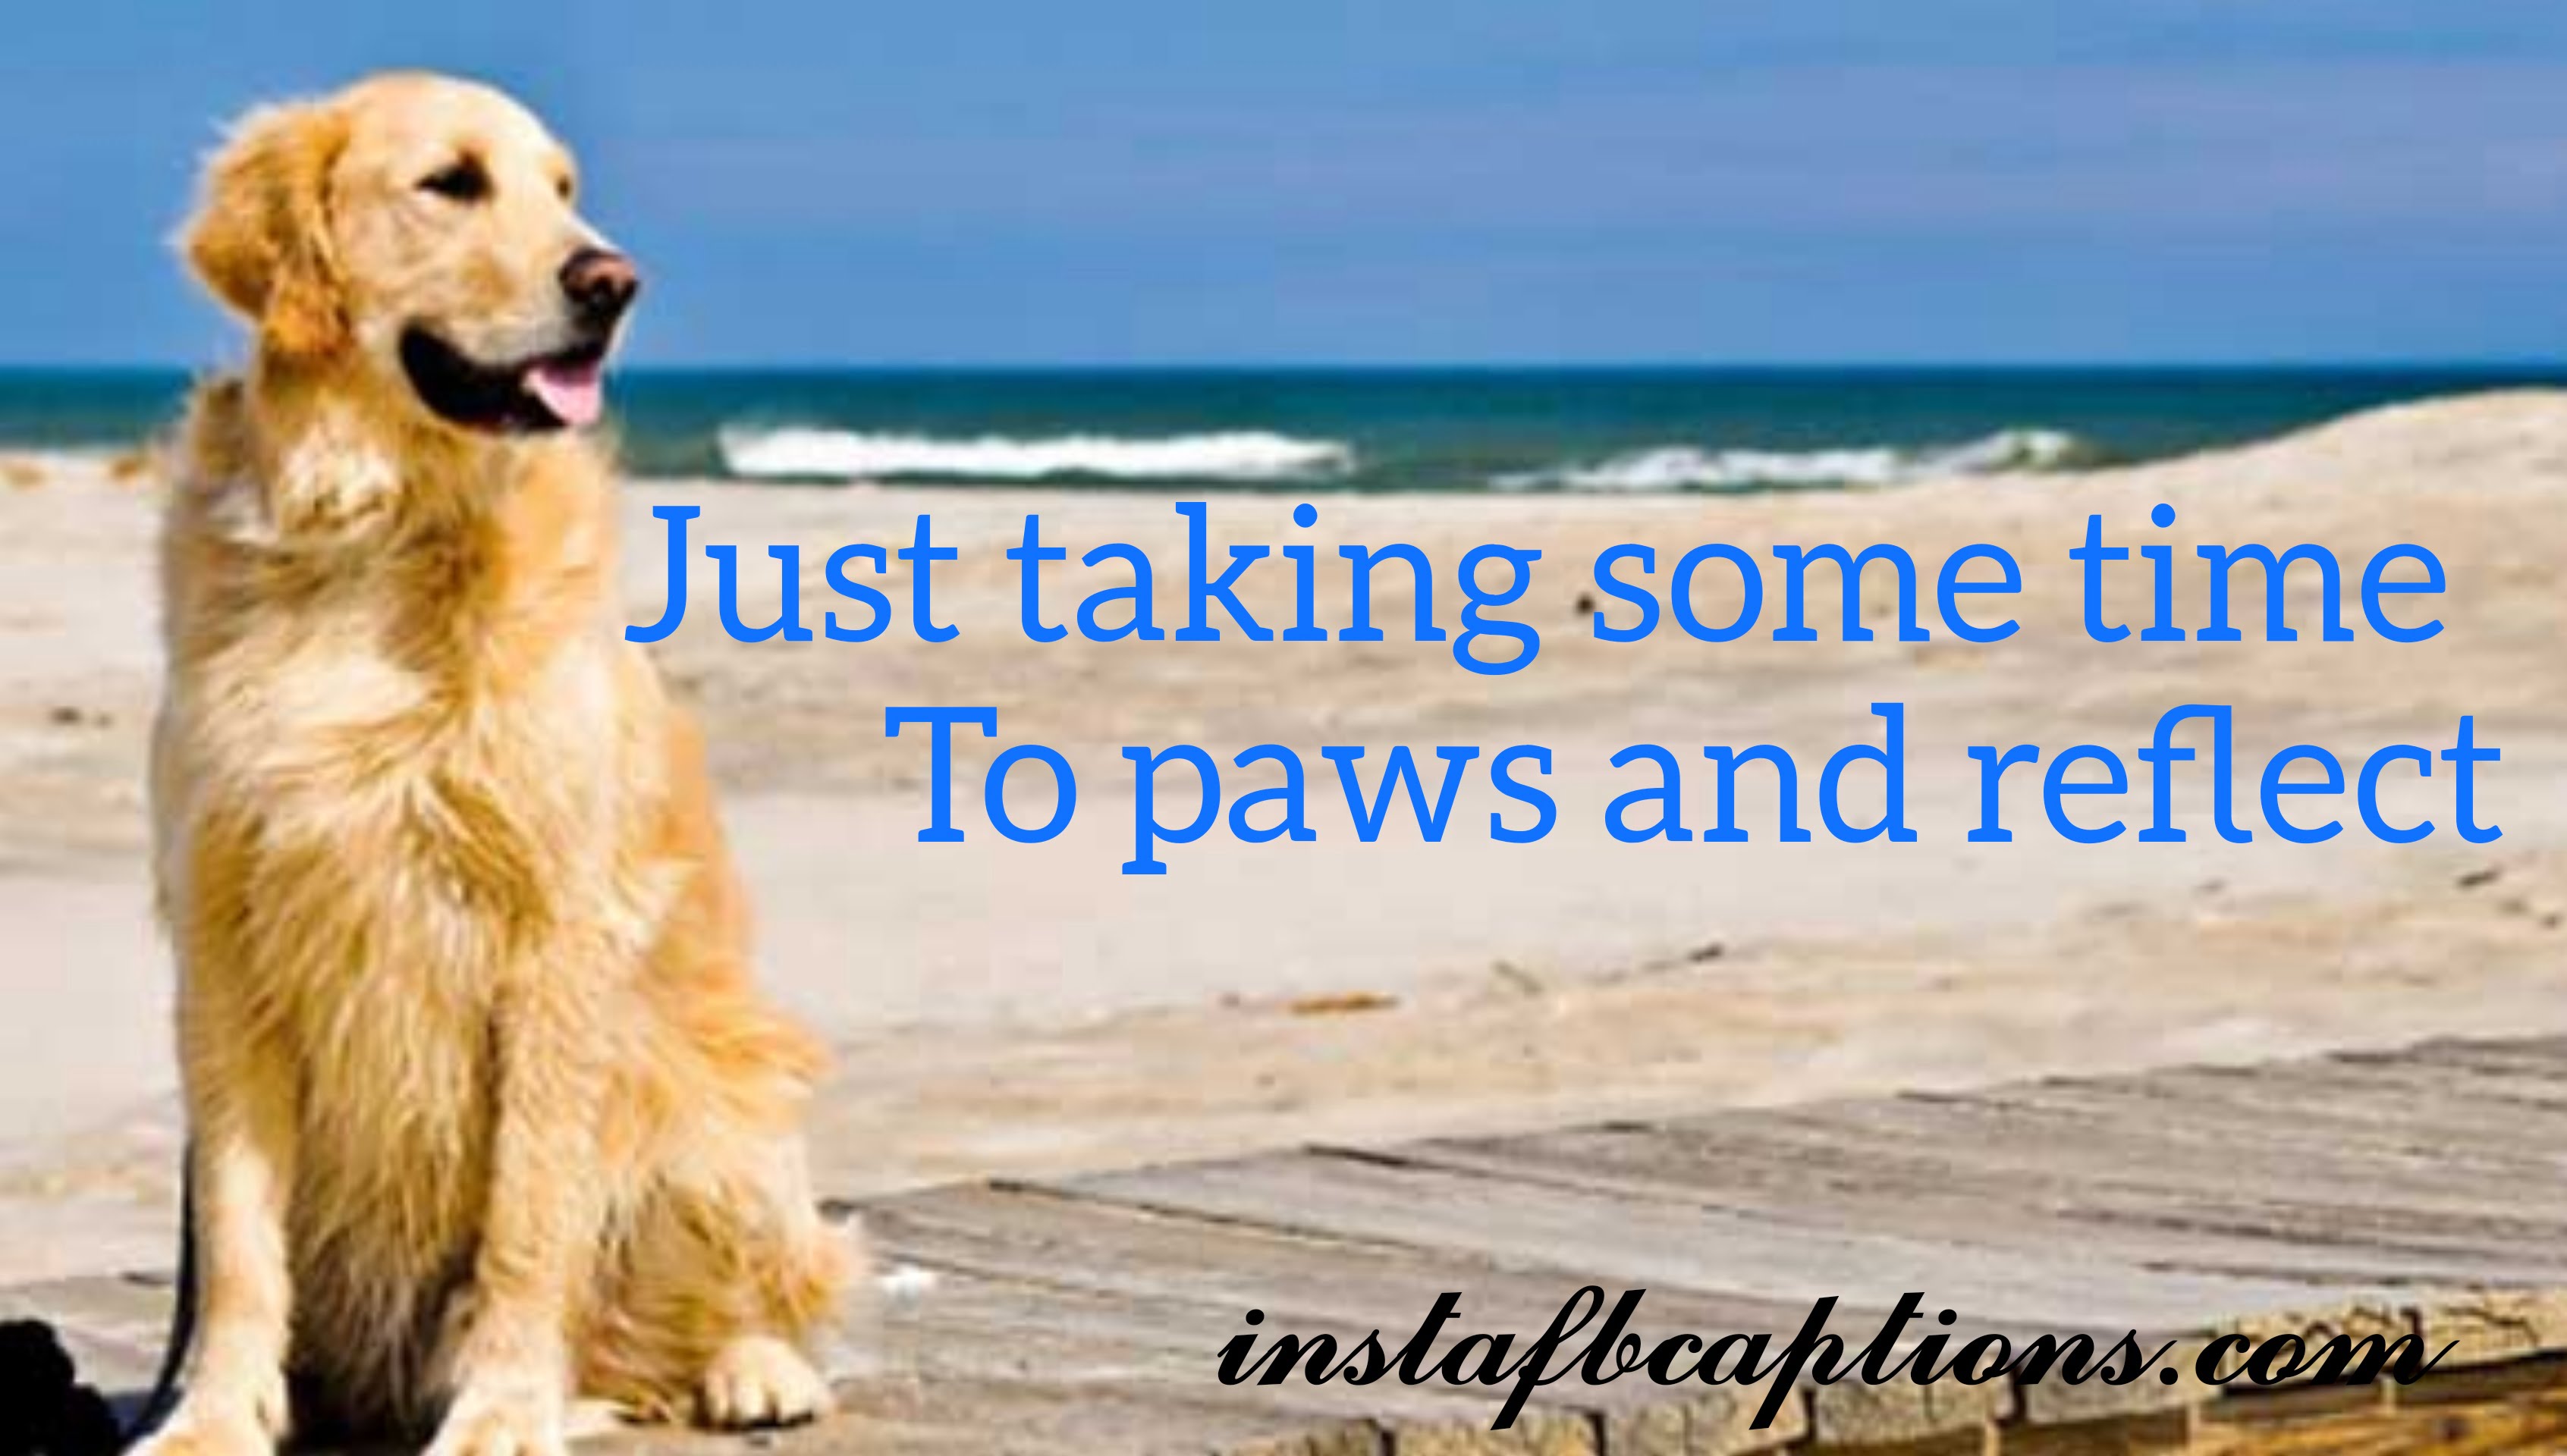 Just taking some time to paws and reflect.  - Dog on beach captions - 125+ Pawfect Instagram Captions for Puppy Lovers in 2023